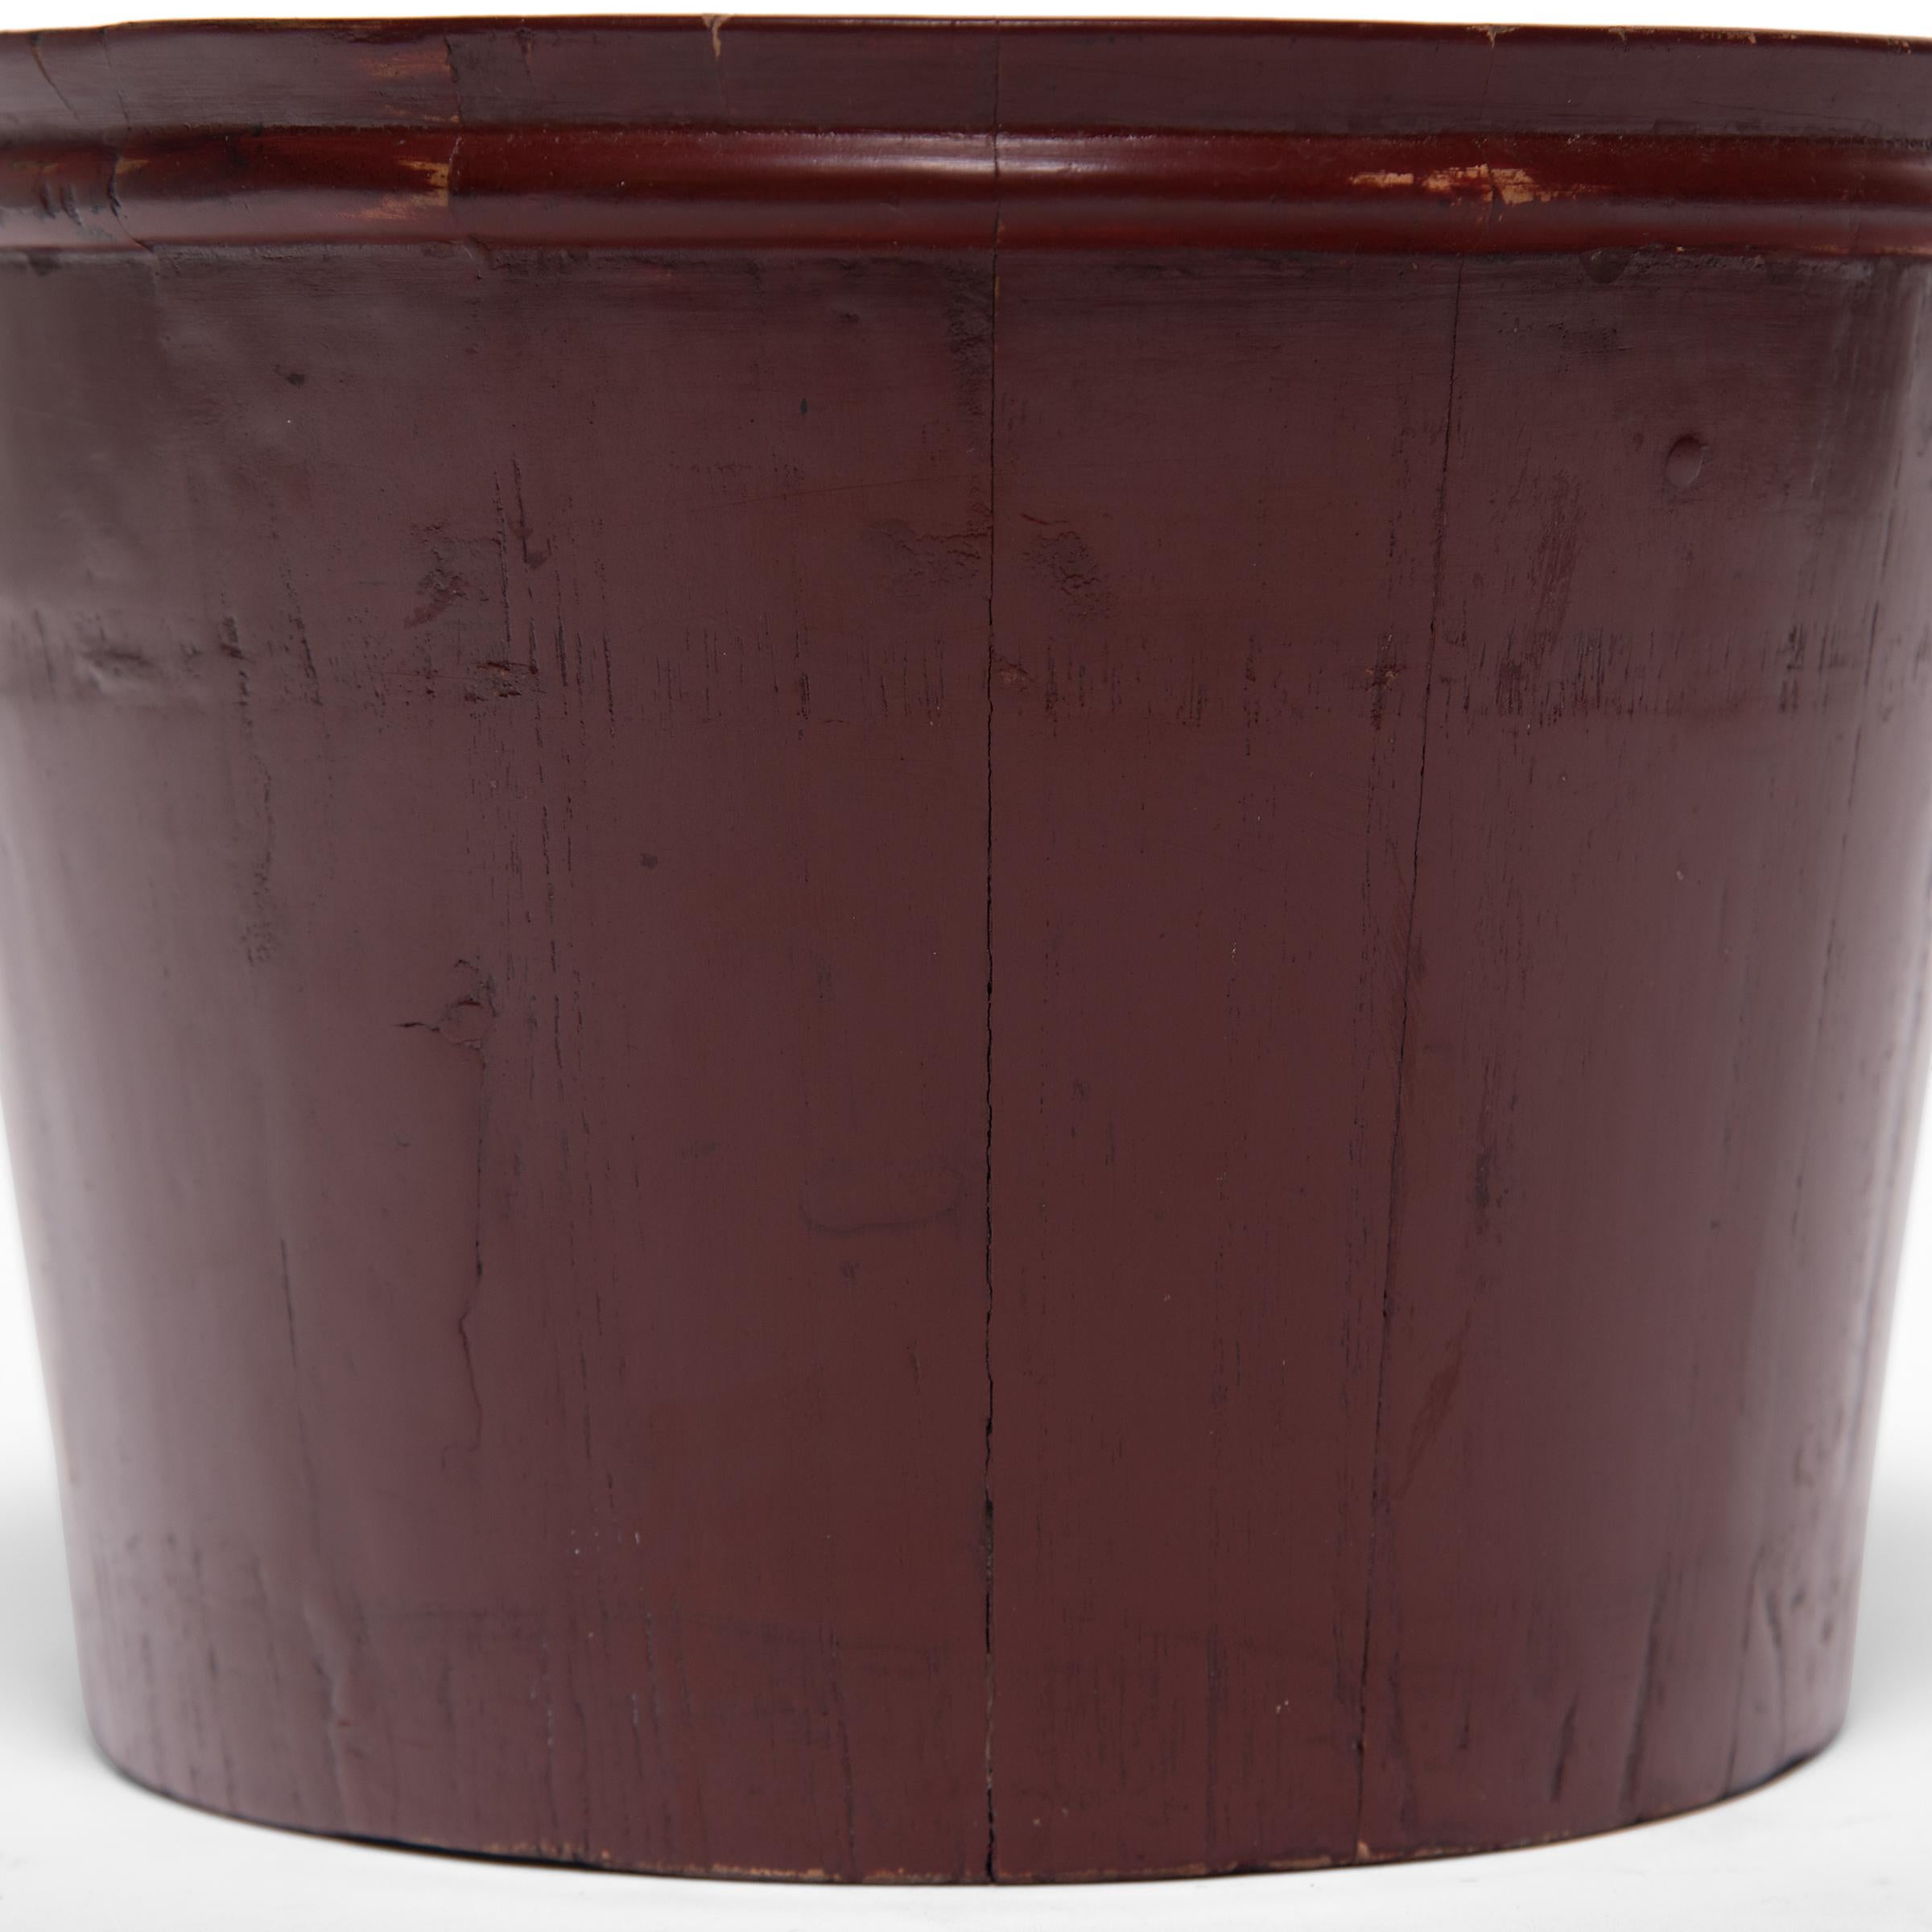 20th Century Chinese Lacquered Water Bucket, c. 1900